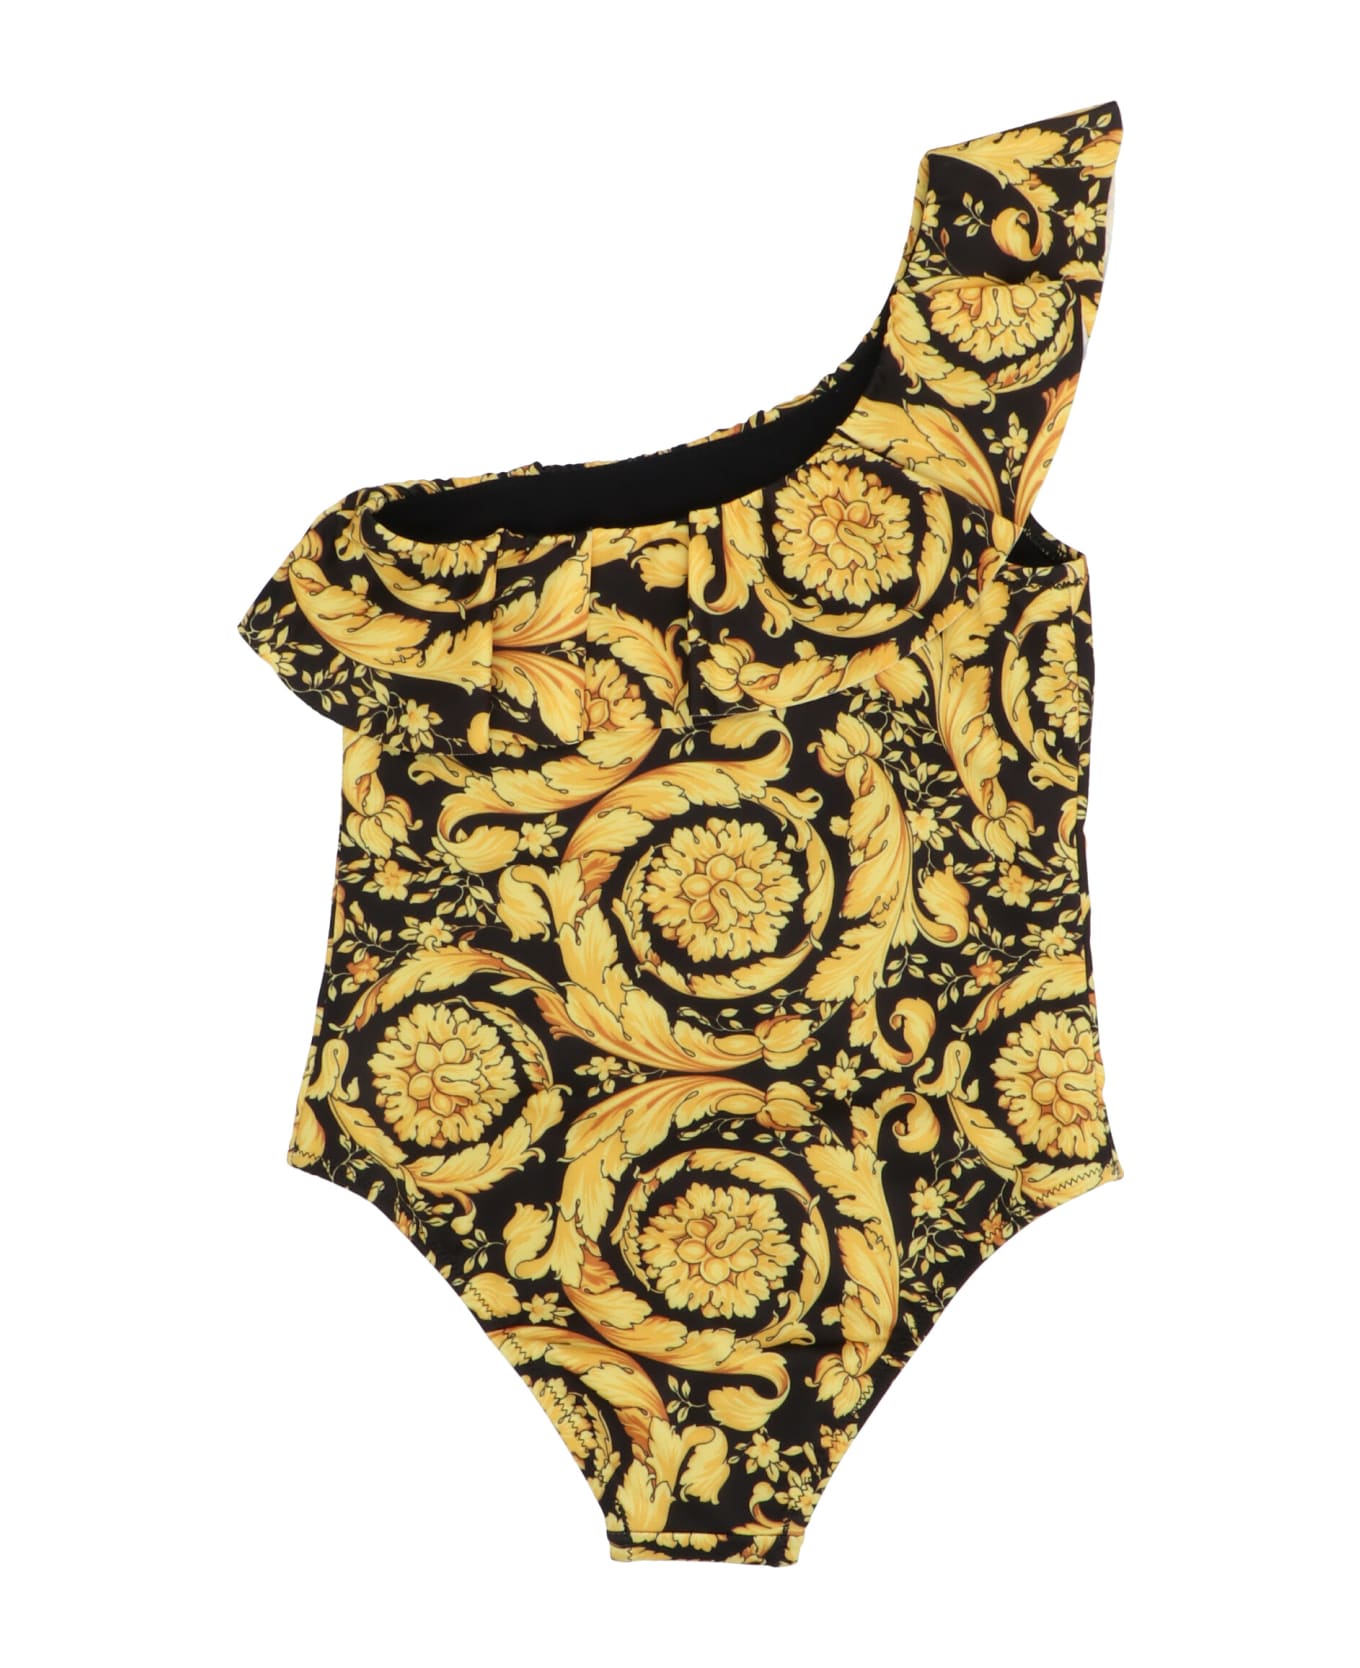 Versace 'baroque Ss92' One-piece Swimsuit - Black/gold